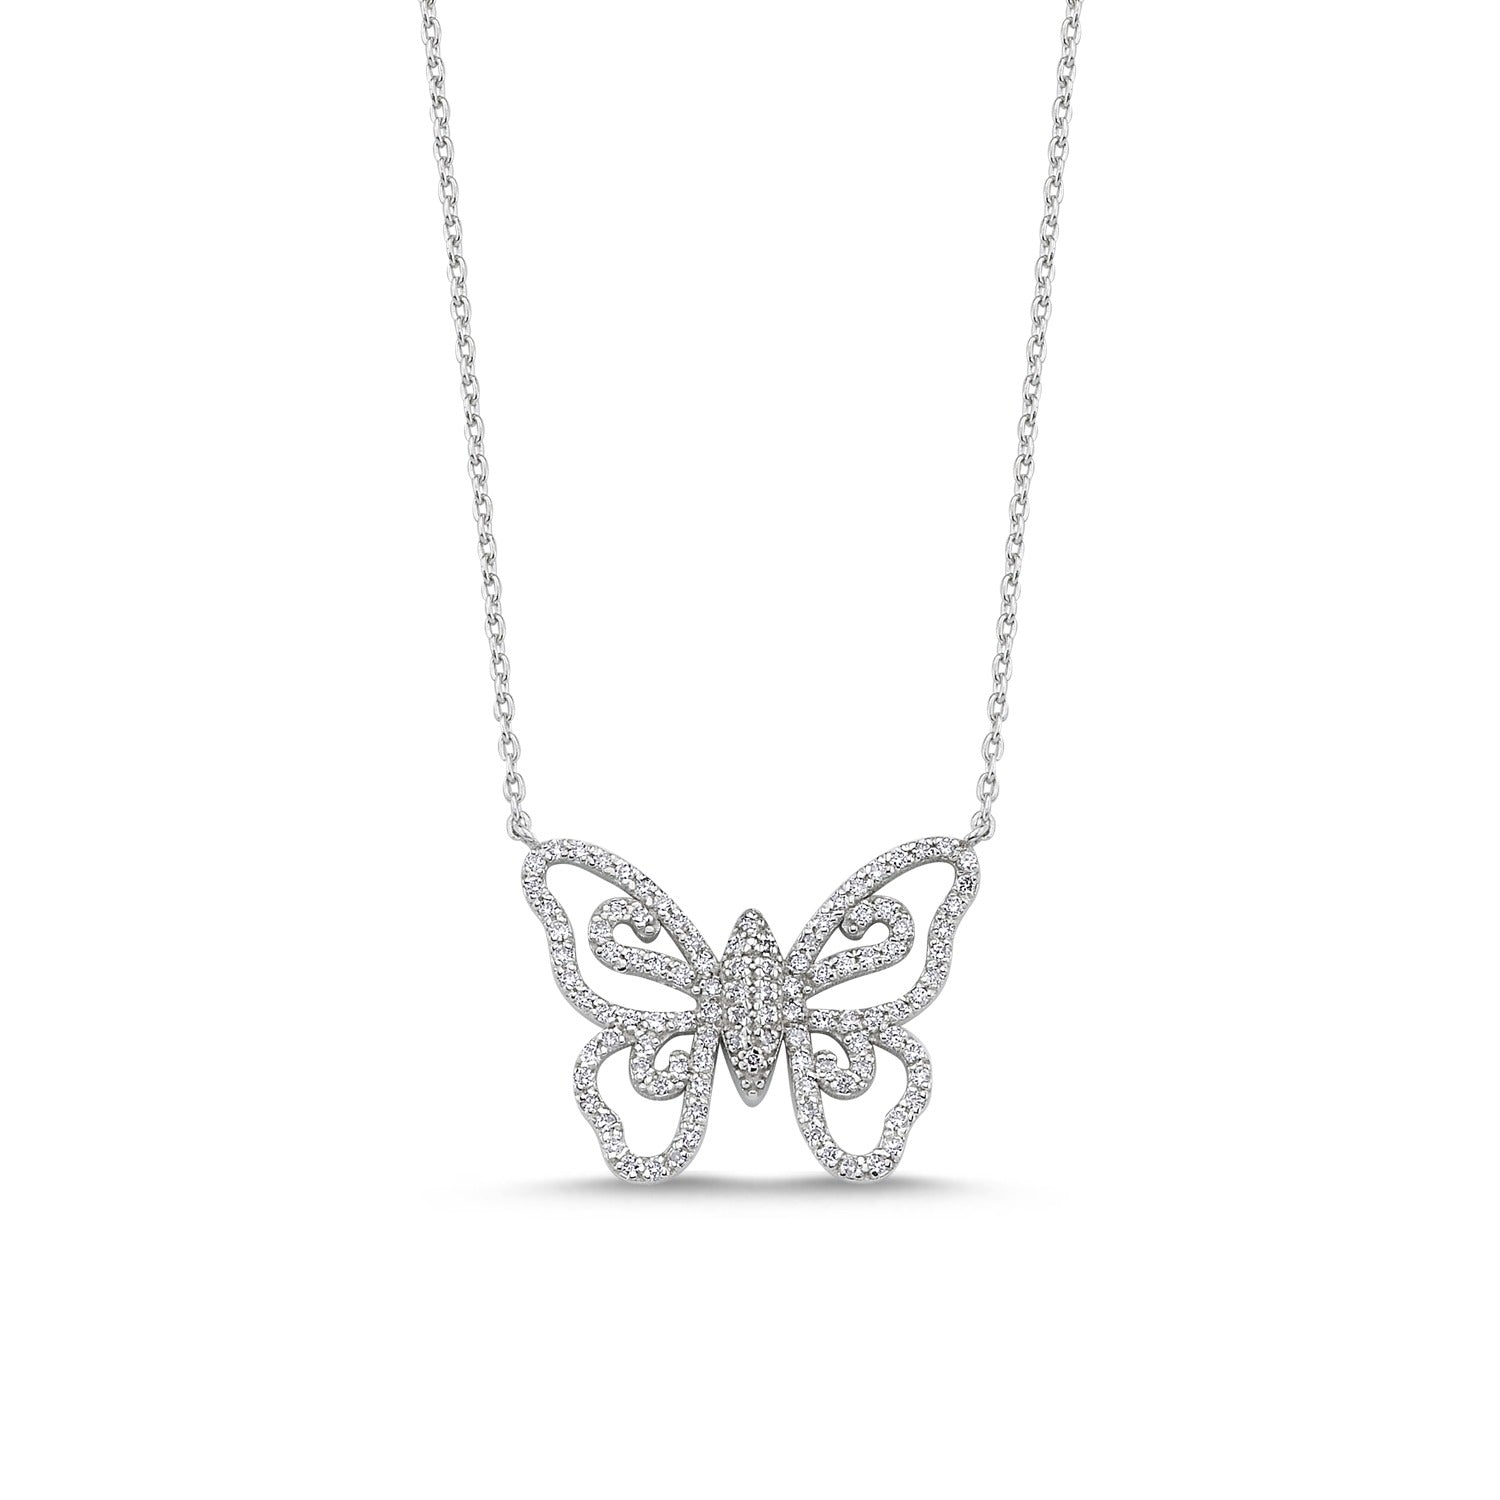 CZ Butterfly Necklace with Silver Stones - Jessimara